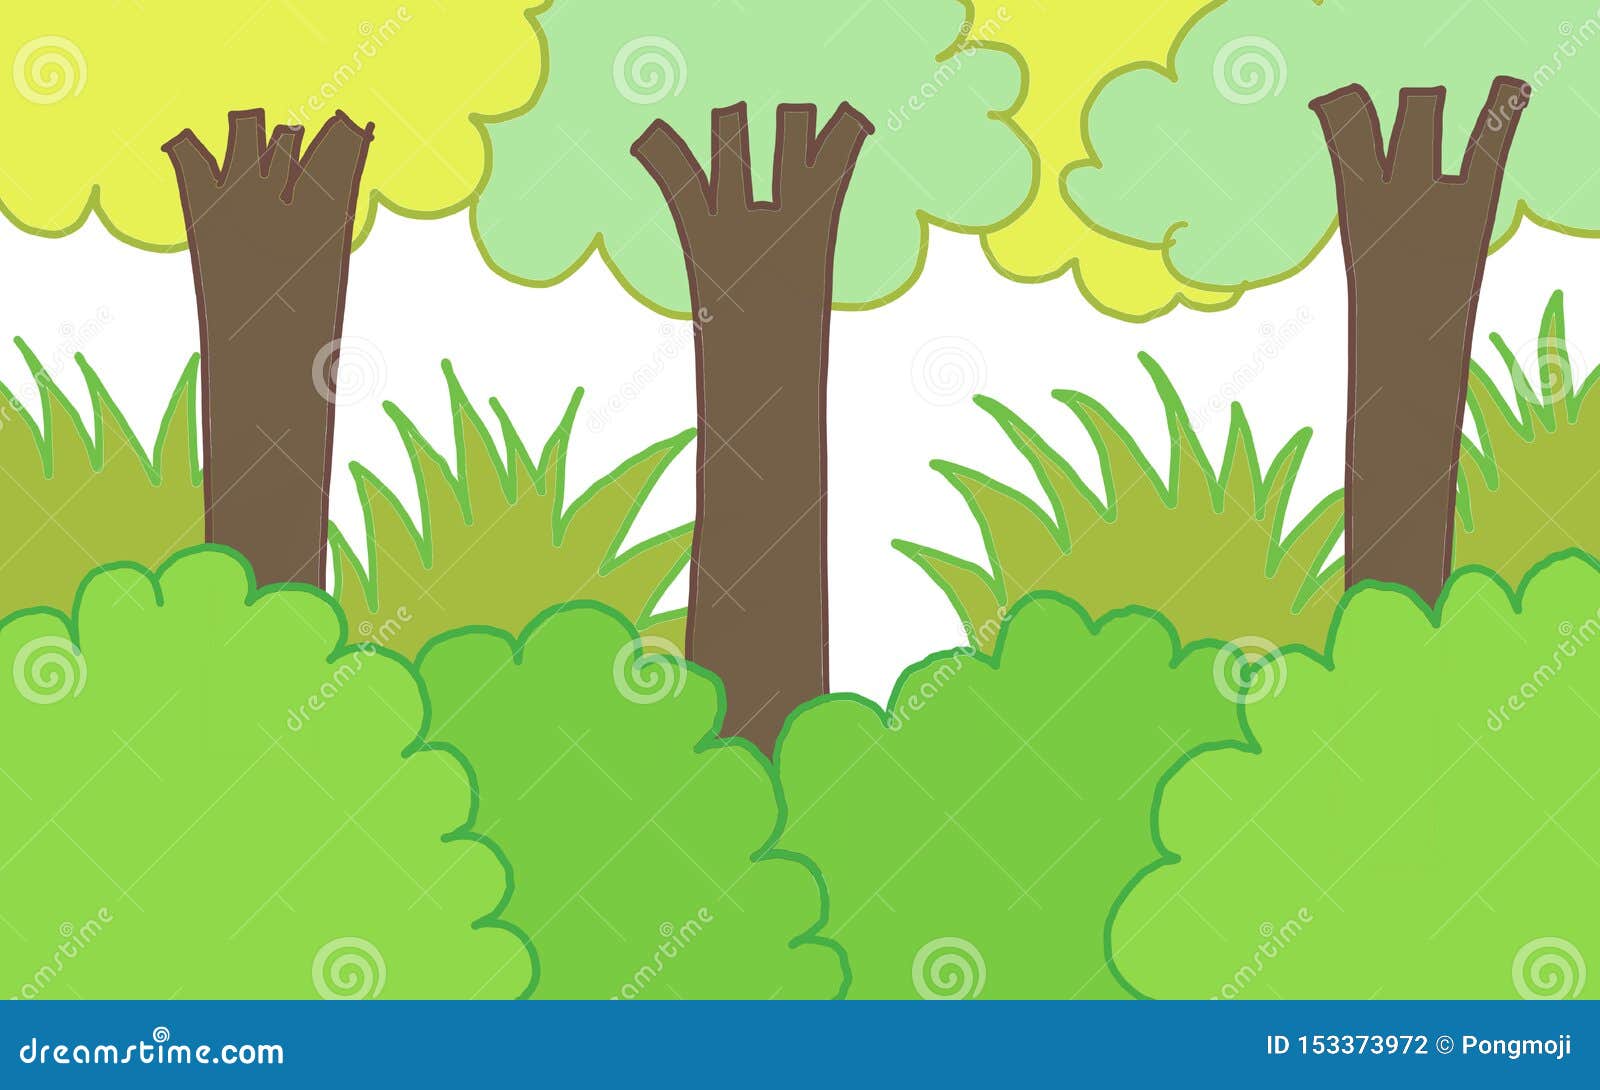 How to draw forest 06  EasyToDrawcom